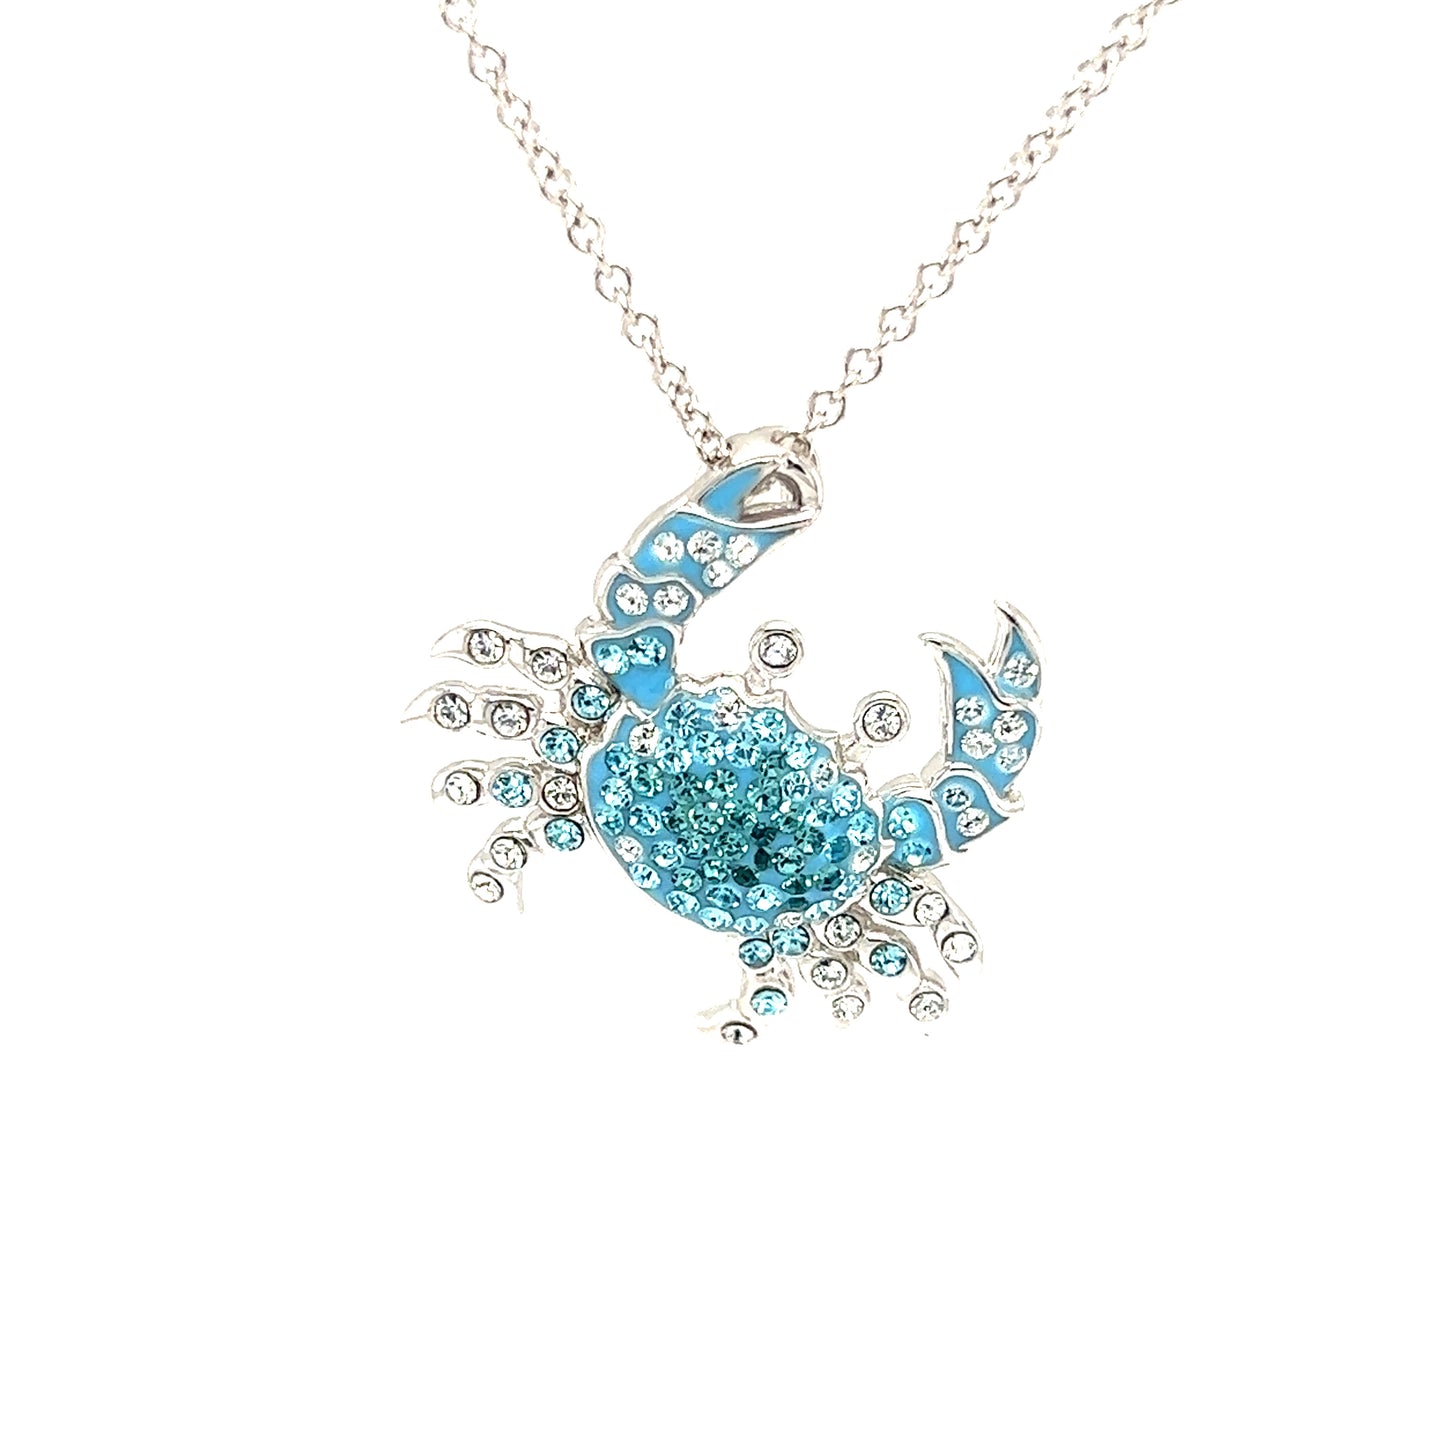 Blue Crab Necklace with Aqua and White Crystals in Sterling Silver Pendant Front View